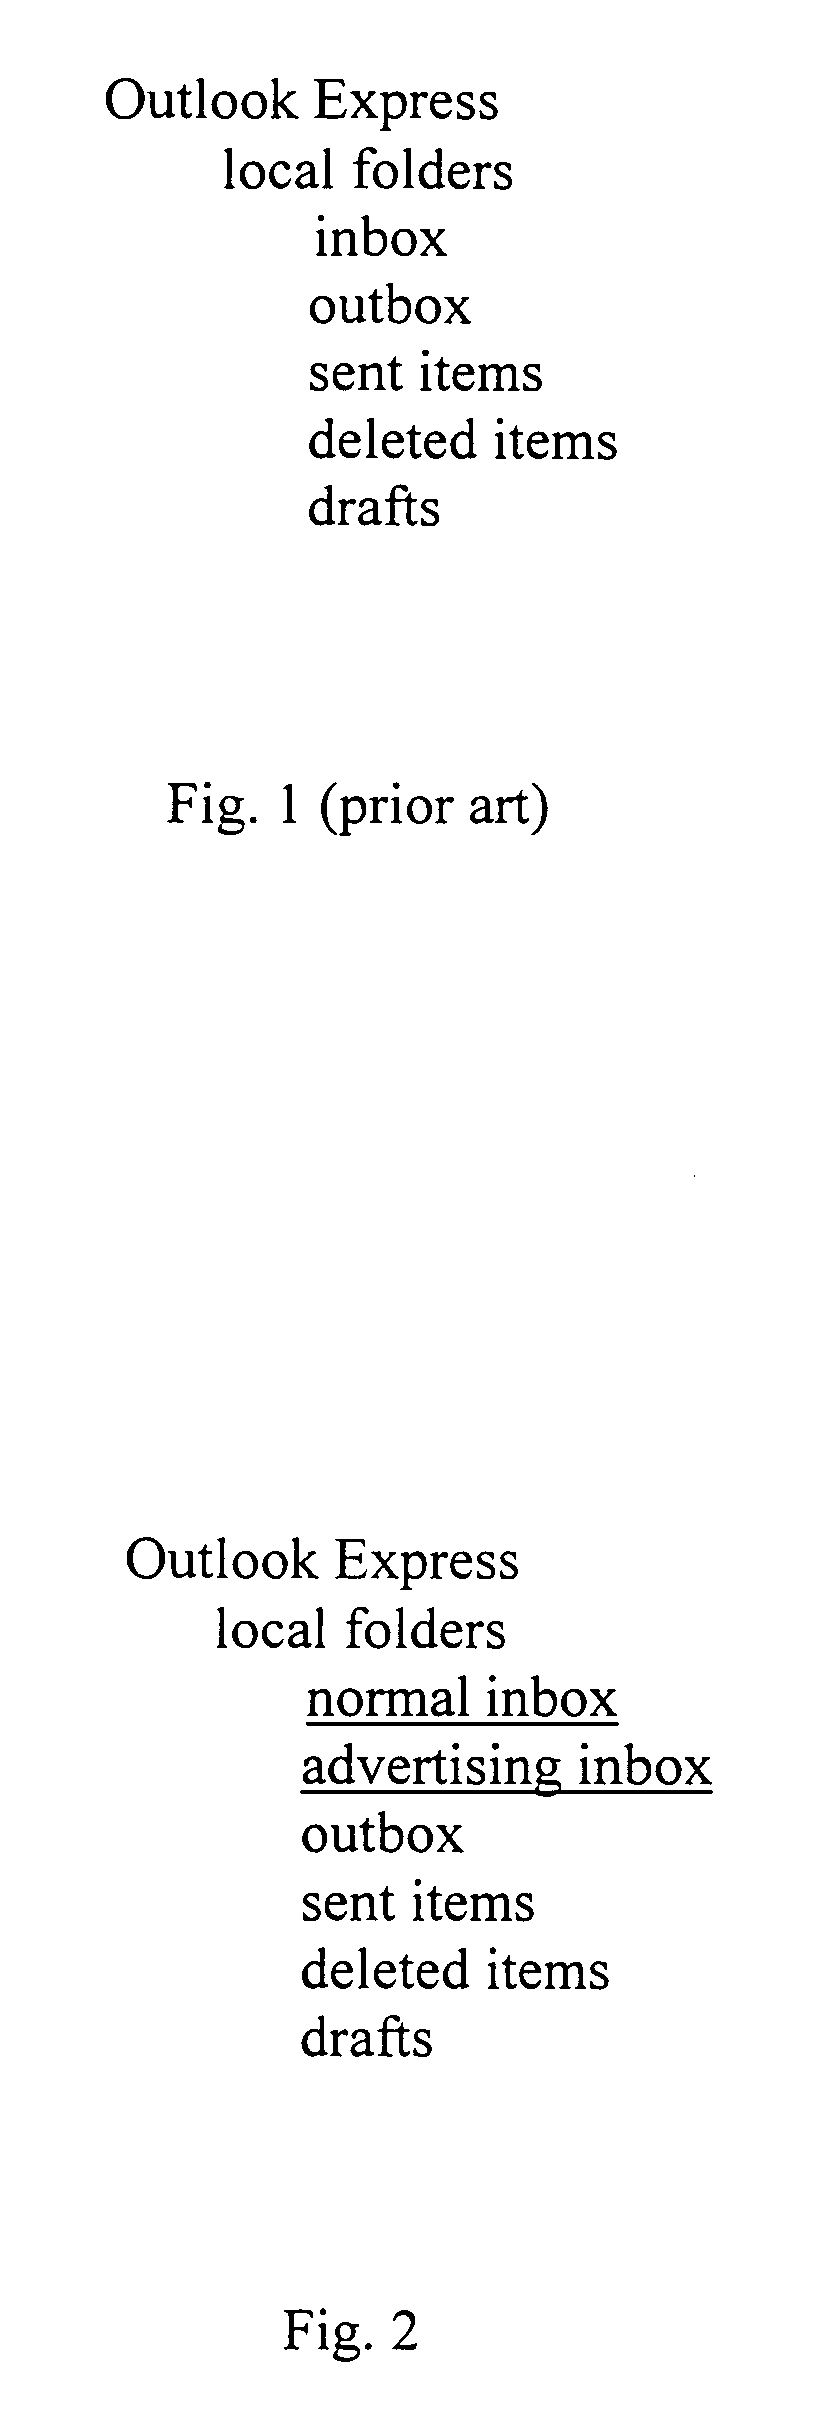 Method for receiving and classifying normal e-mail and advertising e-mail